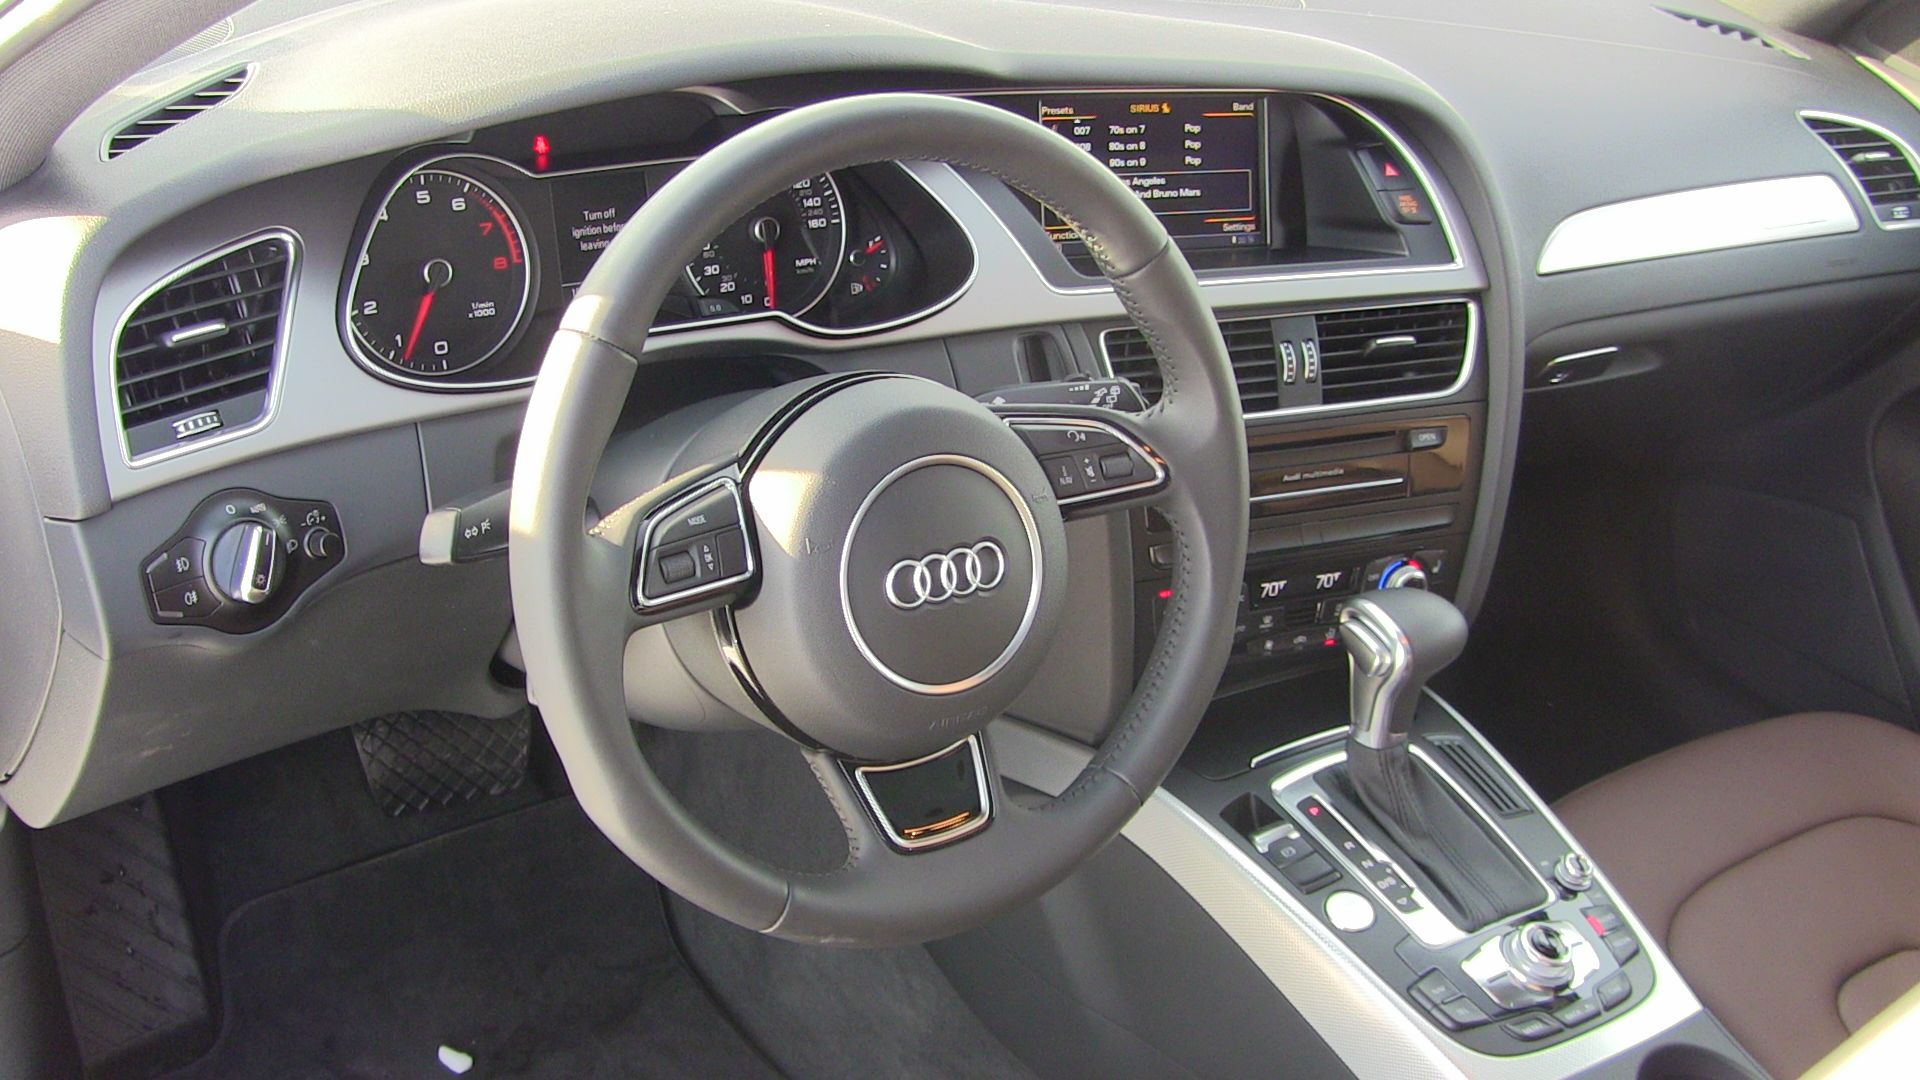 2015 Audi Allroad Is This The Last Of The Breed Review